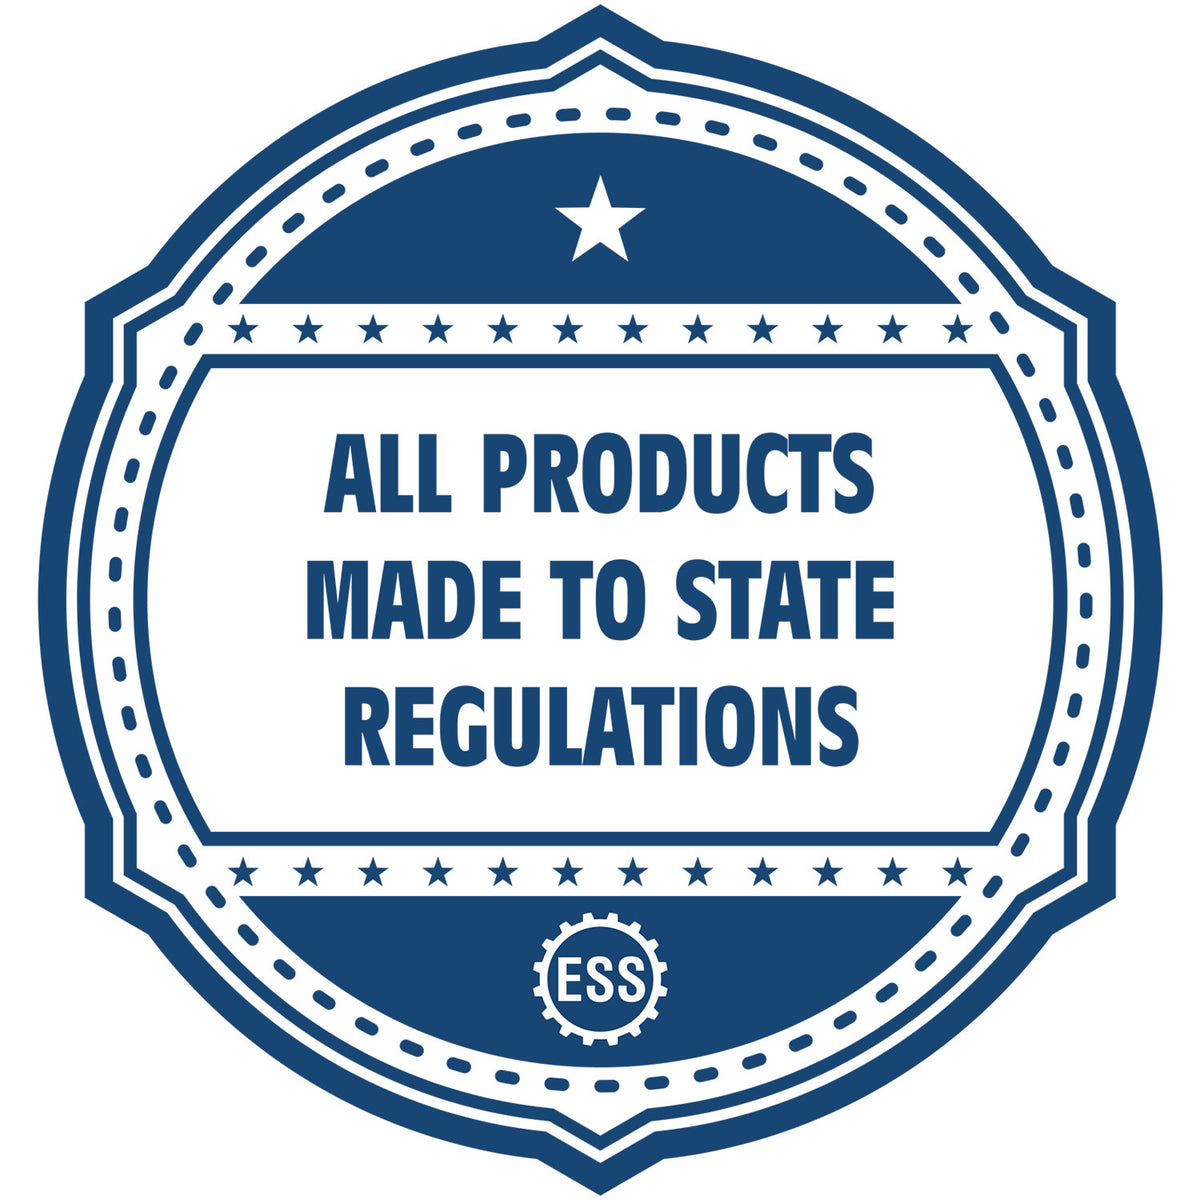 An icon or badge element for the Self-Inking Massachusetts PE Stamp showing that this product is made in compliance with state regulations.